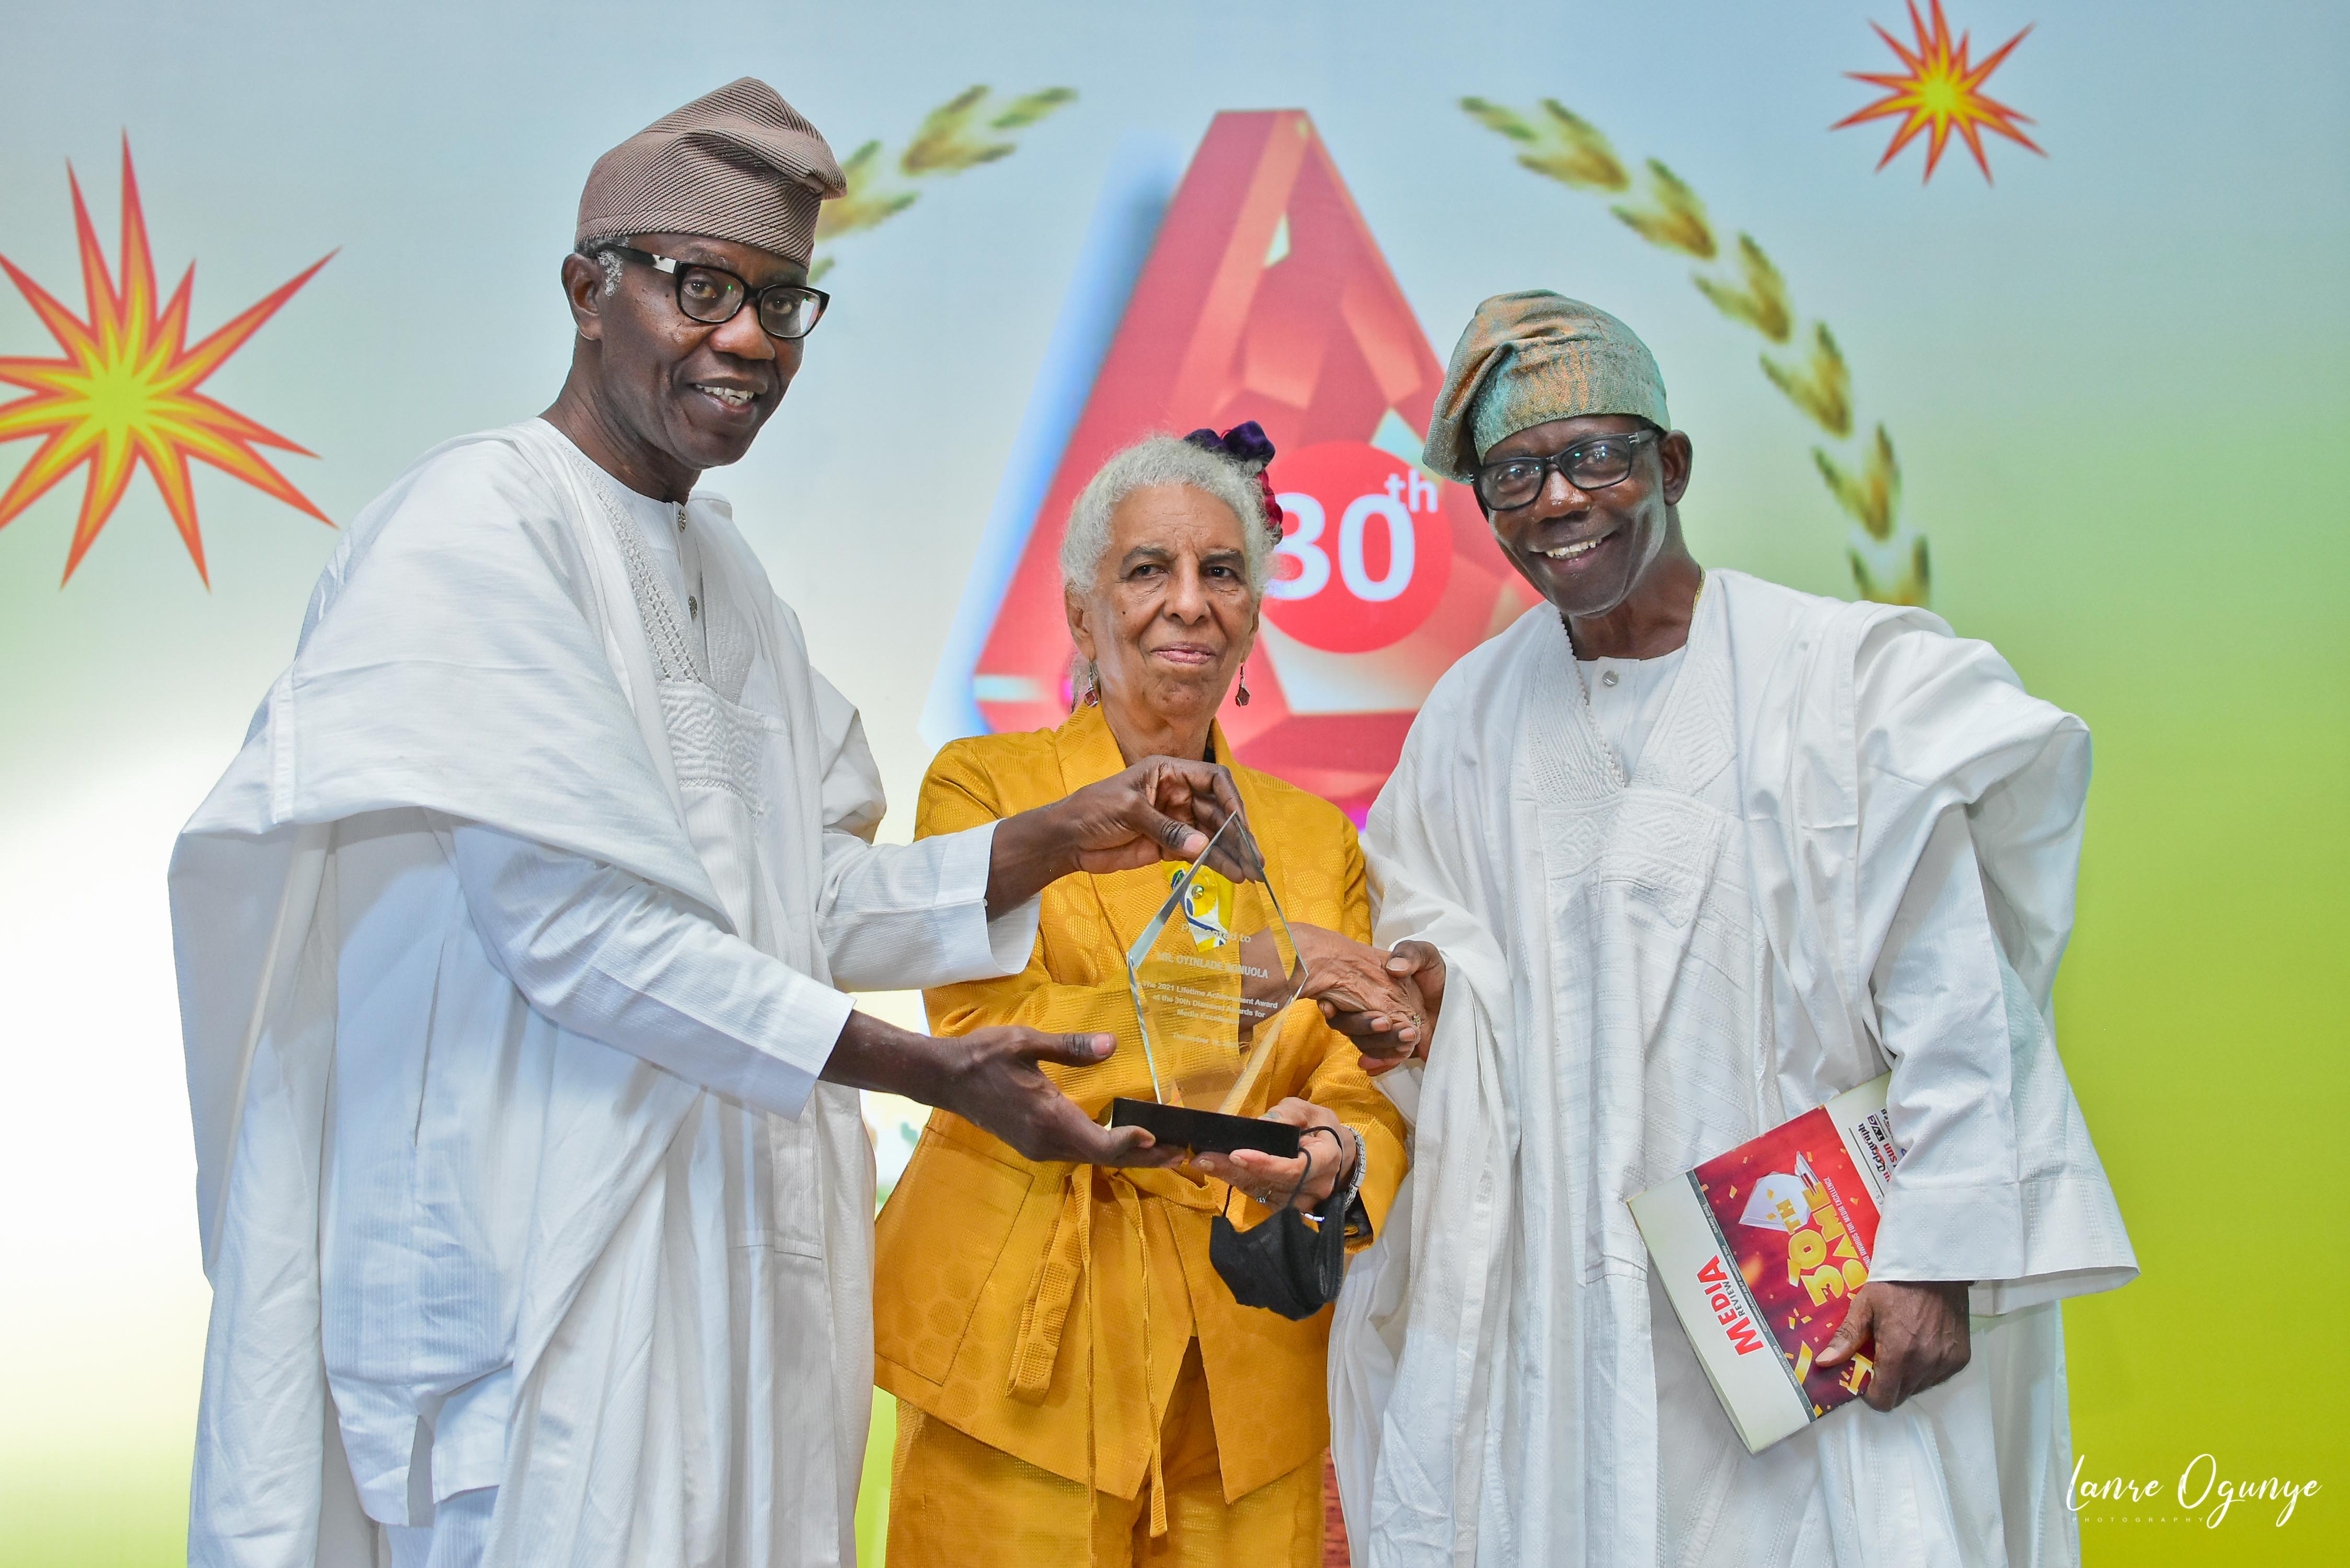 <span  class="uc_style_uc_tiles_grid_image_elementor_uc_items_attribute_title" style="color:#ffffff;">Lifetime Achiever Lade Bonuola with Idowu and Ajose</span>